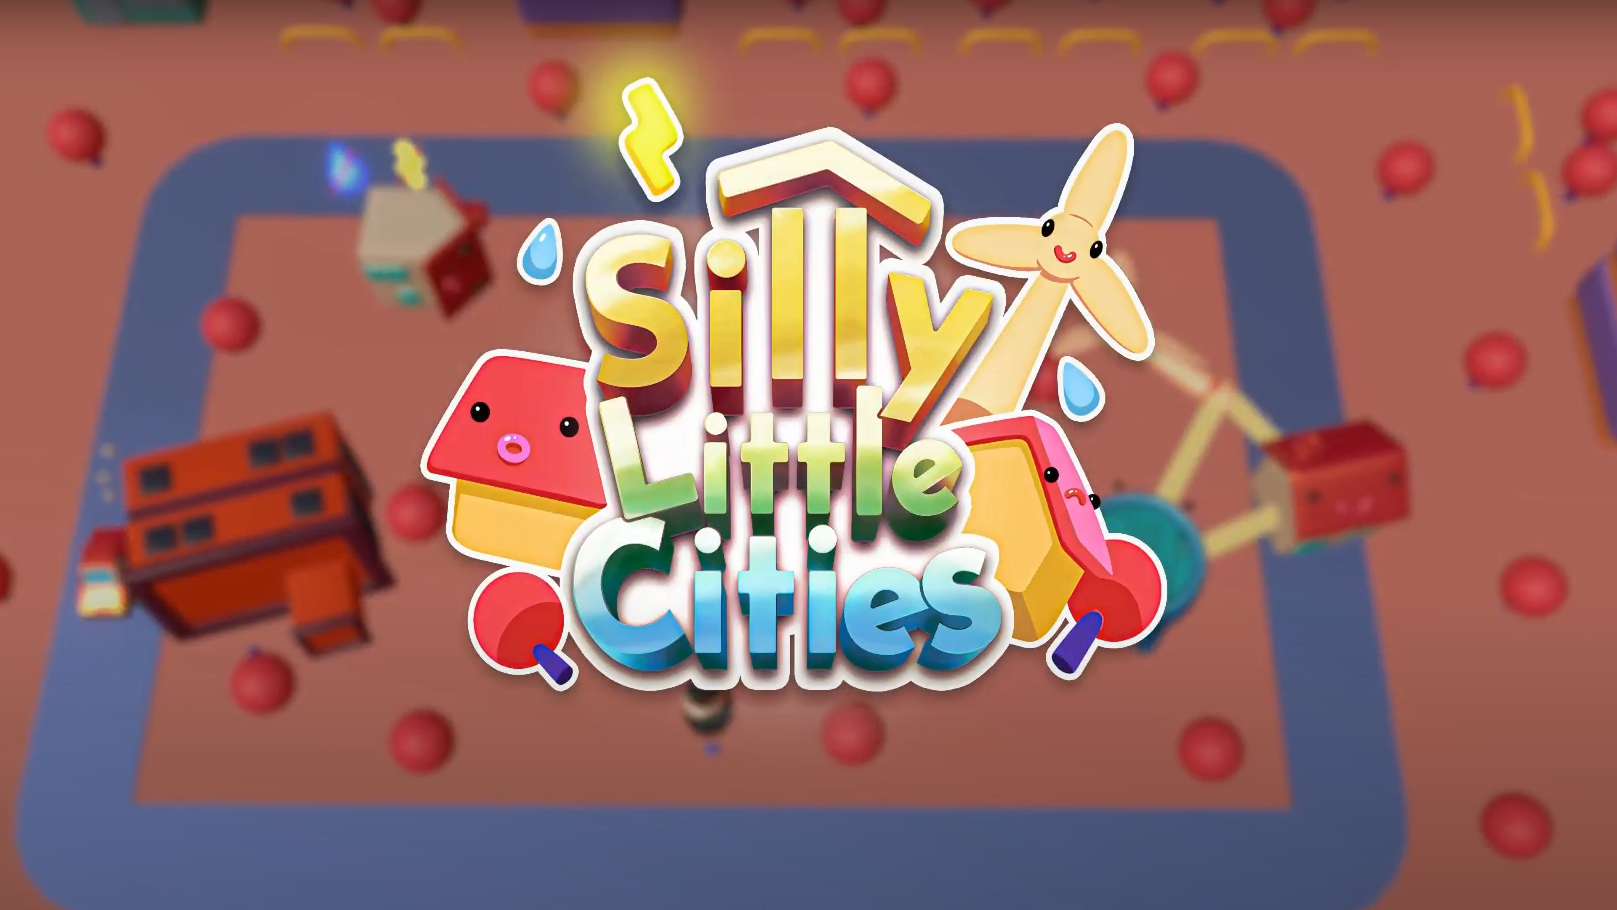 Silly Little Cities